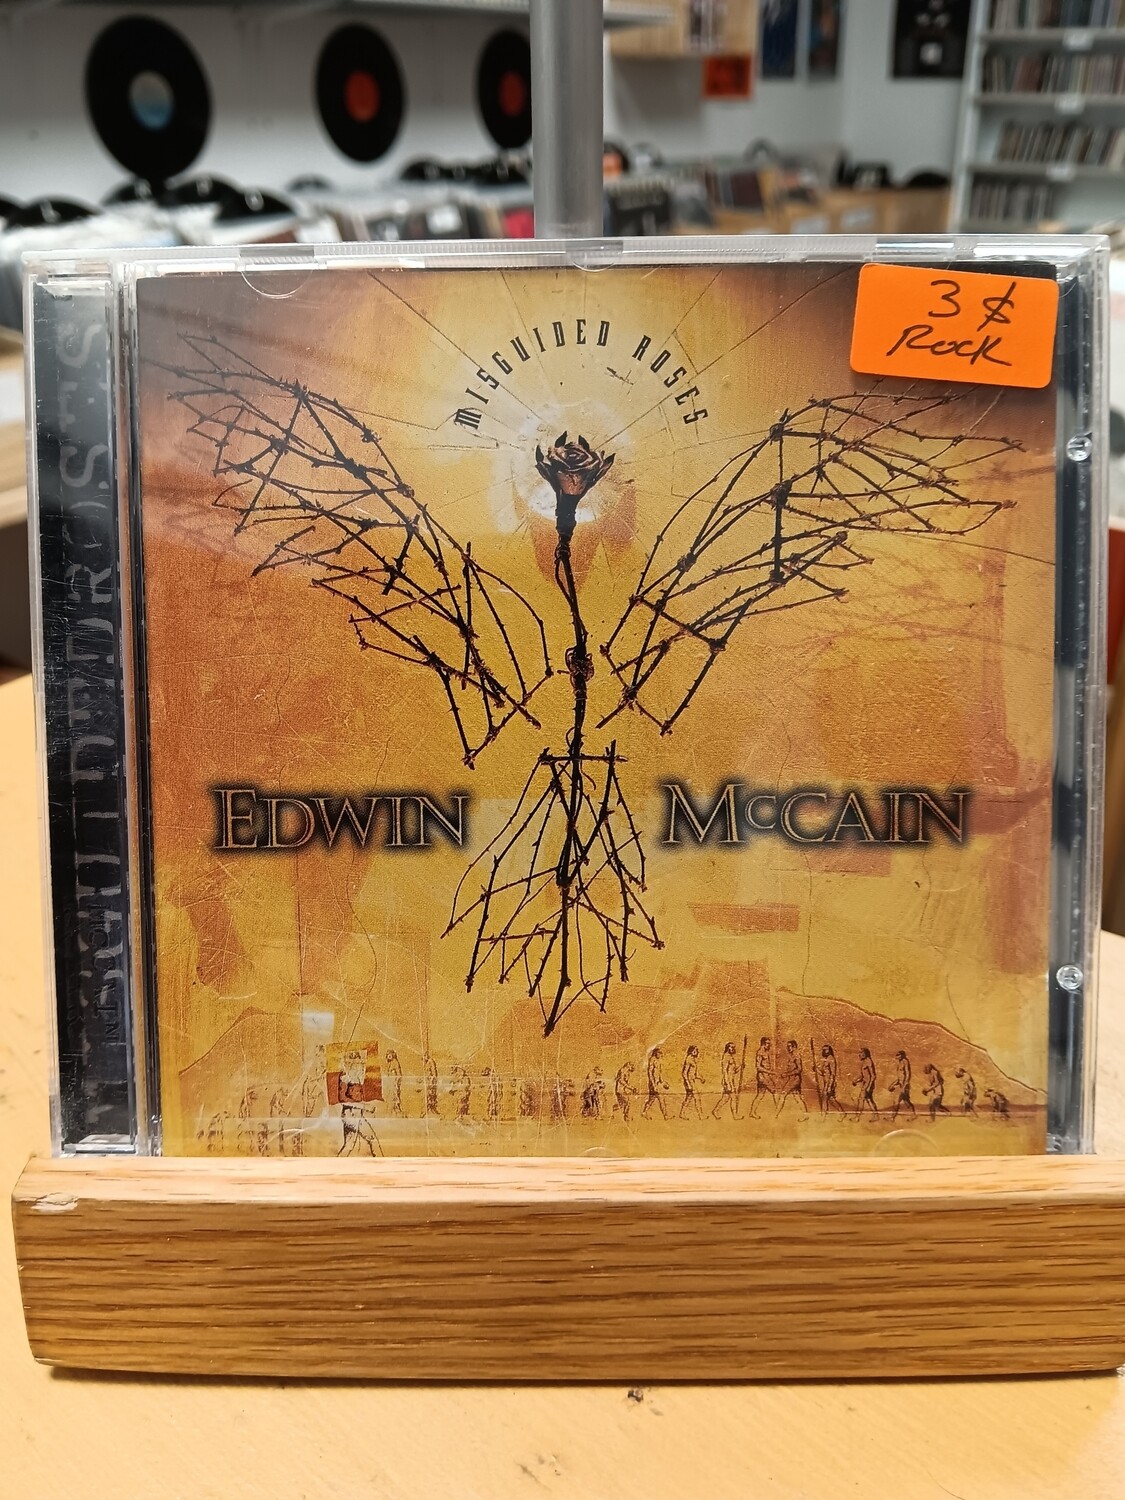 Edwin McCain - Misguided Roses (CD)